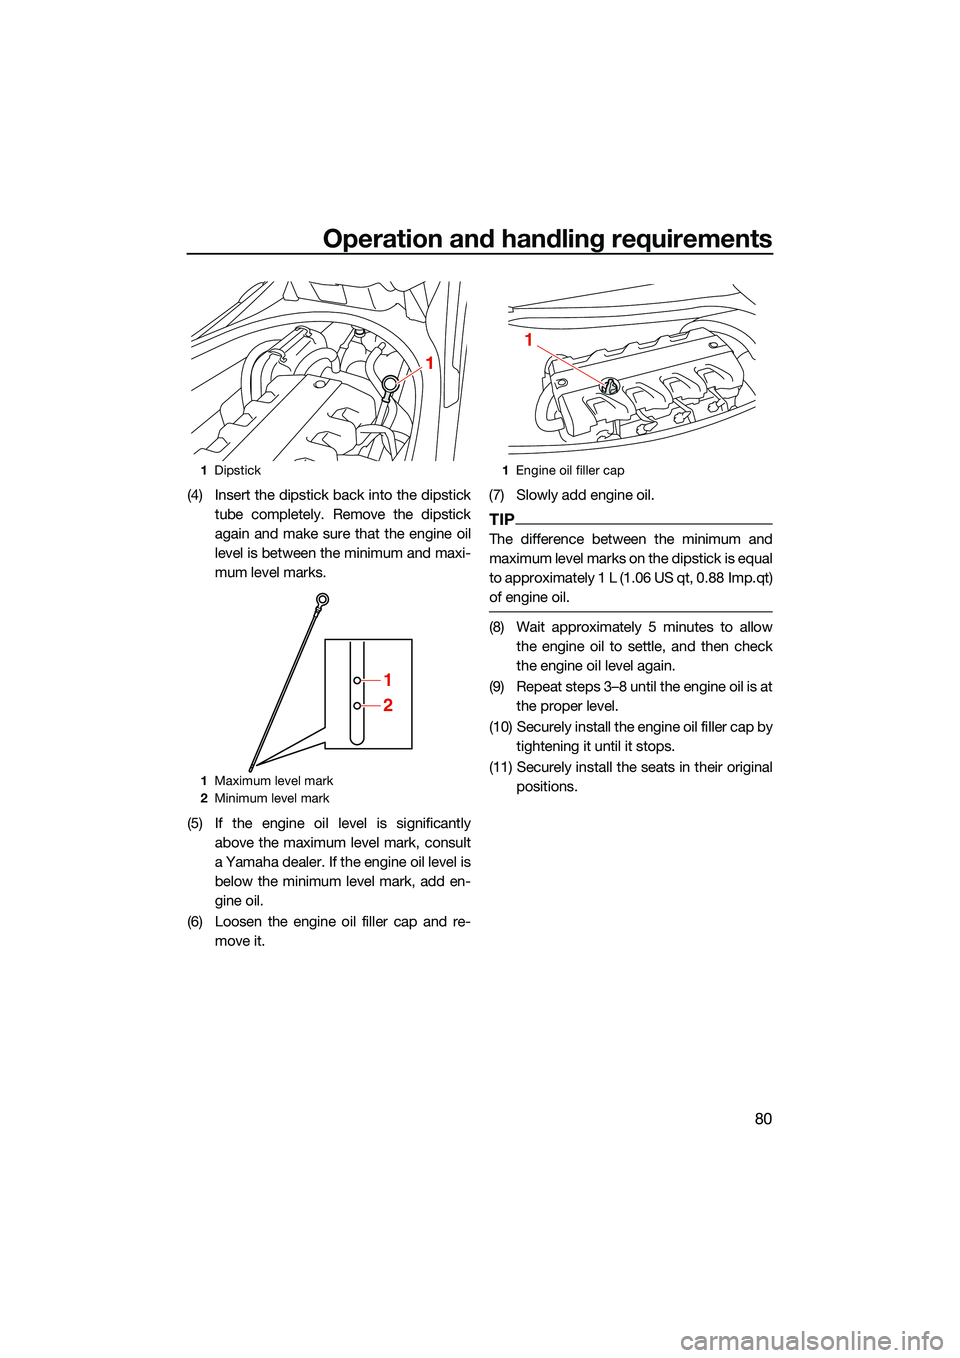 YAMAHA FX HO CRUISER 2022 Manual Online Operation and handling requirements
80
(4) Insert the dipstick back into the dipsticktube completely. Remove the dipstick
again and make sure that the engine oil
level is between the minimum and maxi-